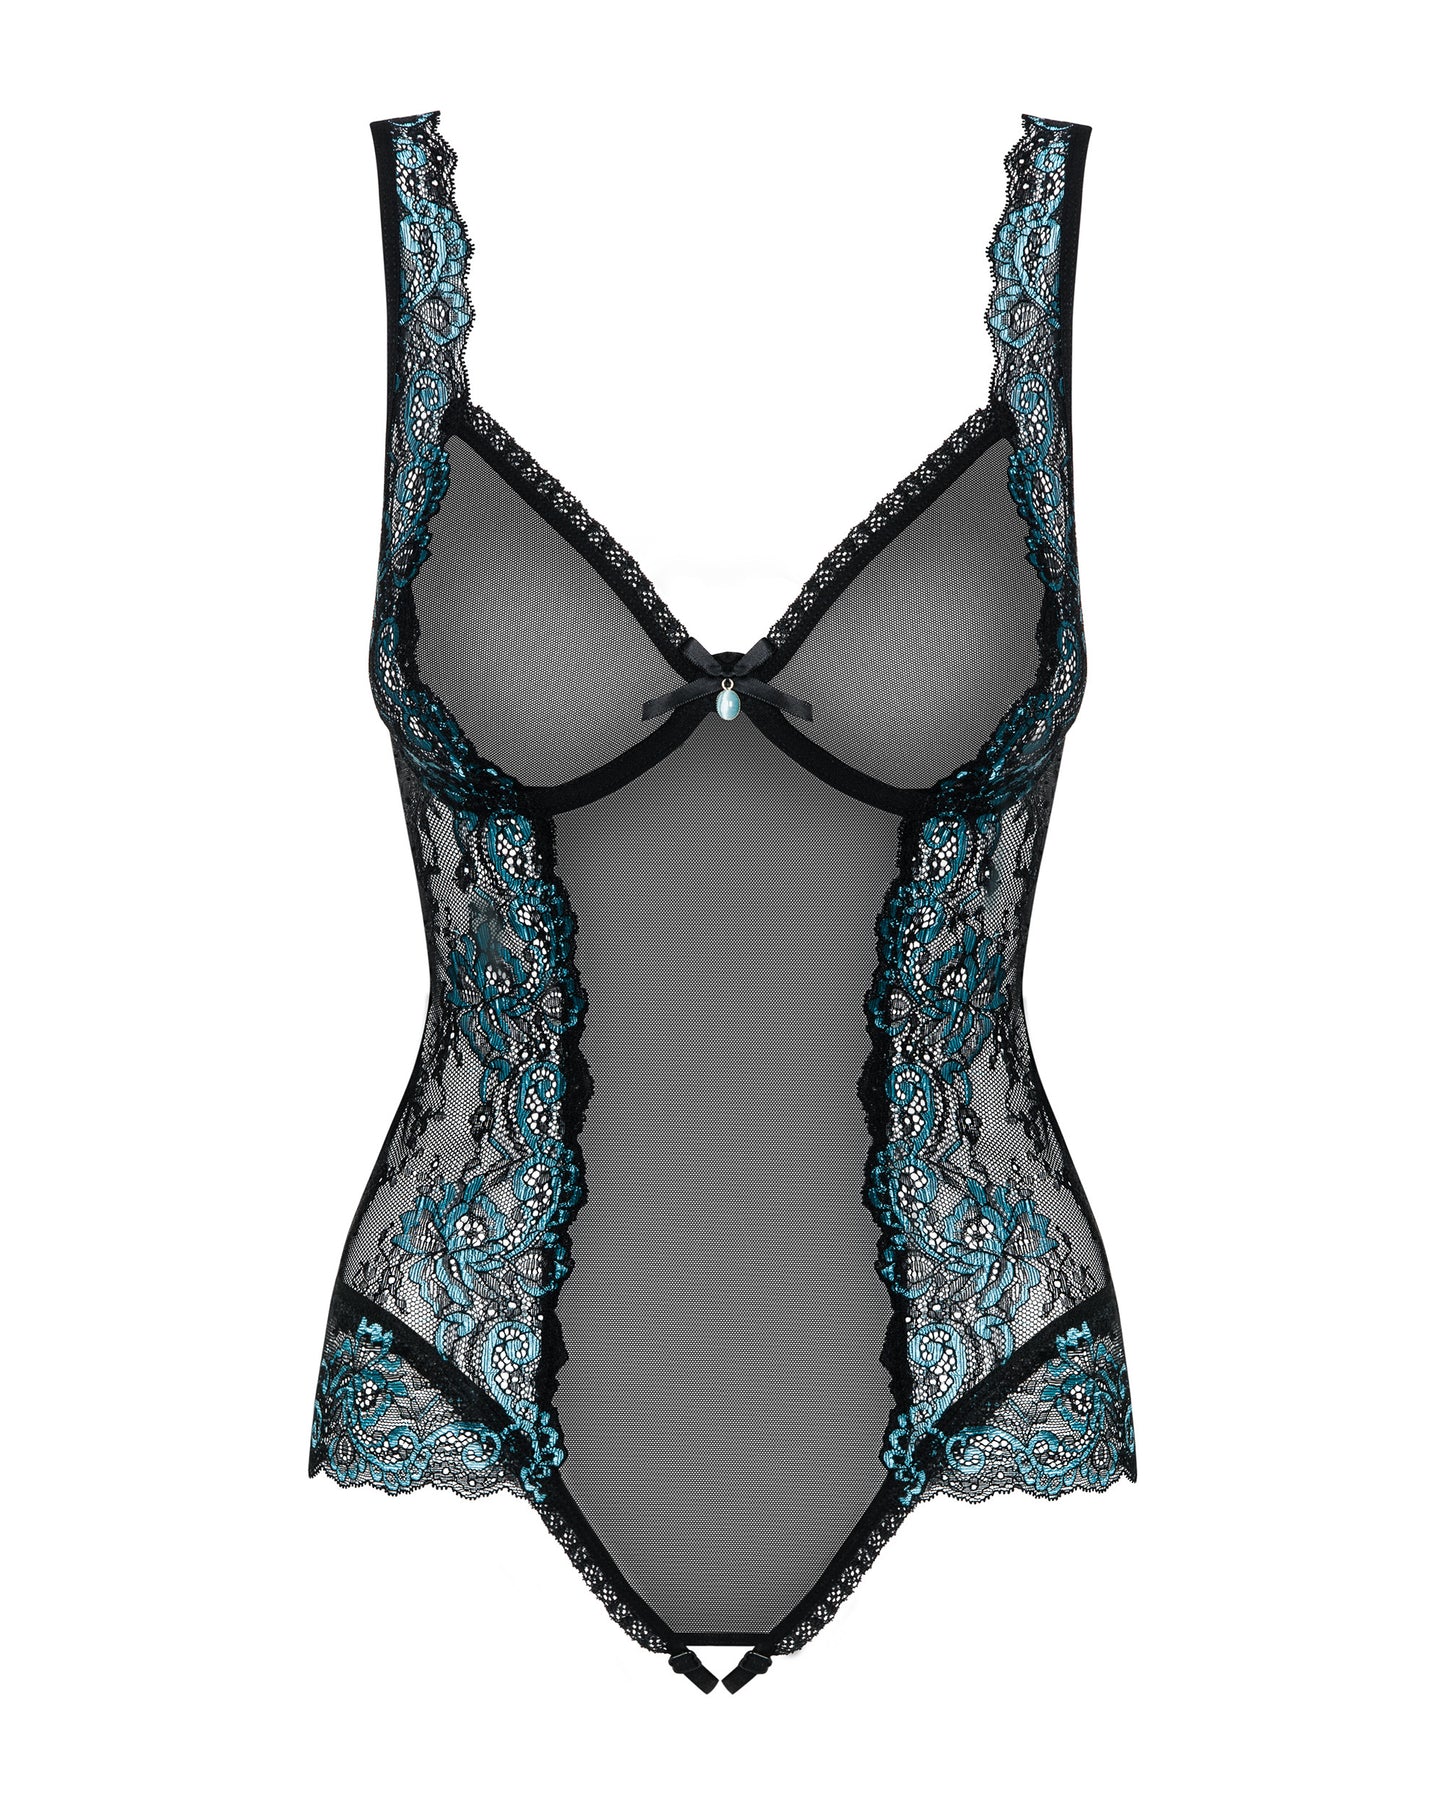 Stunning Turquoise two toned lace, Soft sensual Mesh. With underwire cups and a turquoise pendant between. This gorgeously crafted Teddy is the perfect date night underwear with the open crotch detail and lace trims adding a seductive twist.